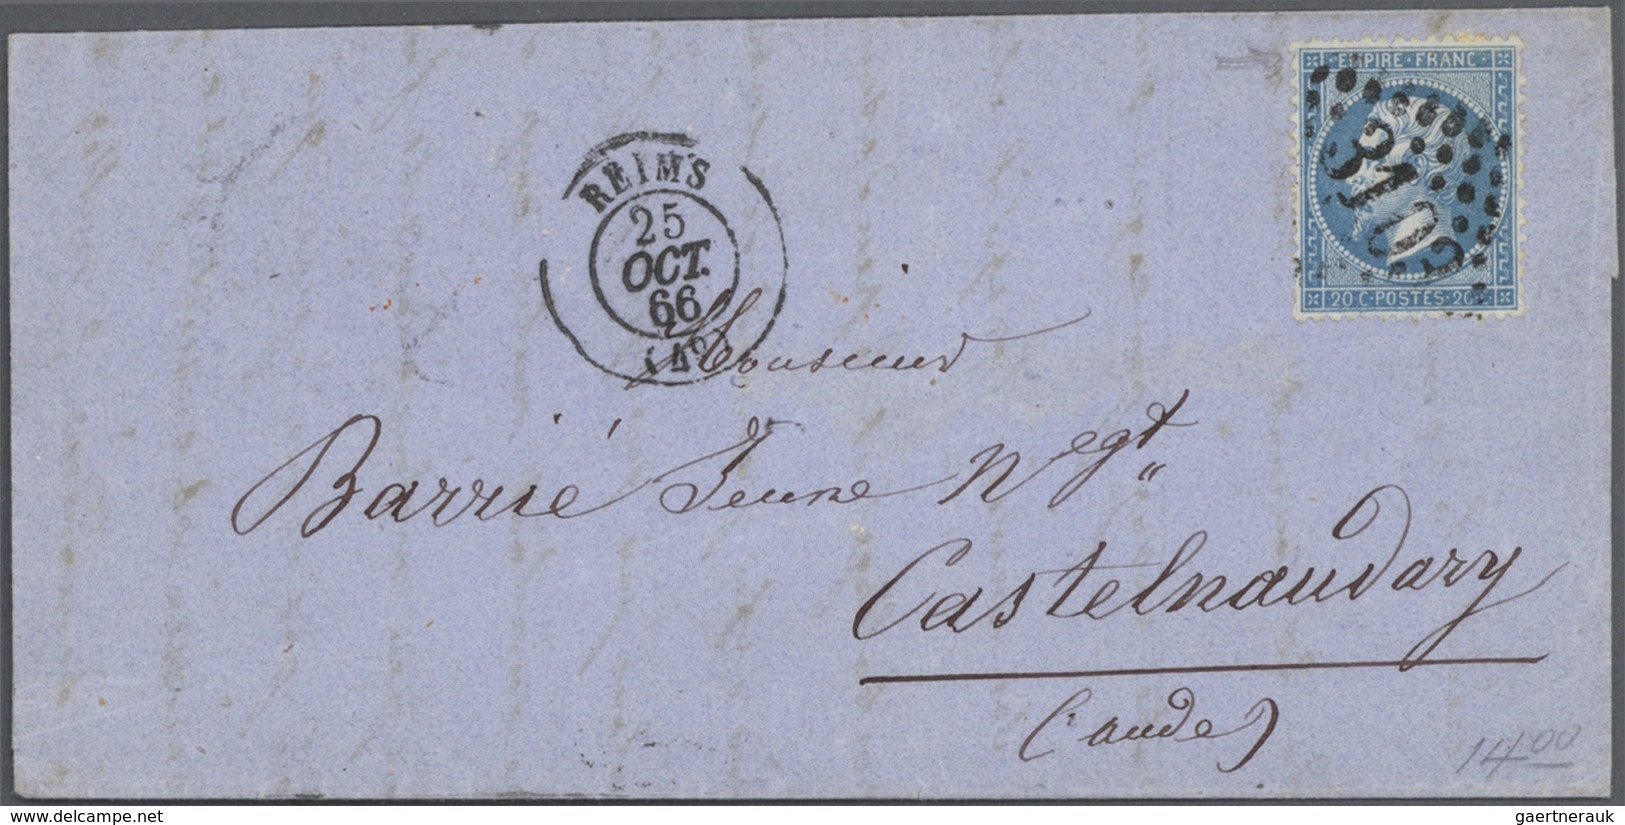 Br/ Frankreich: 1870/1990 (ca.), FRENCH RAILWAY, accumulation of apprx. 180 entires: apprx. 100 (mainly